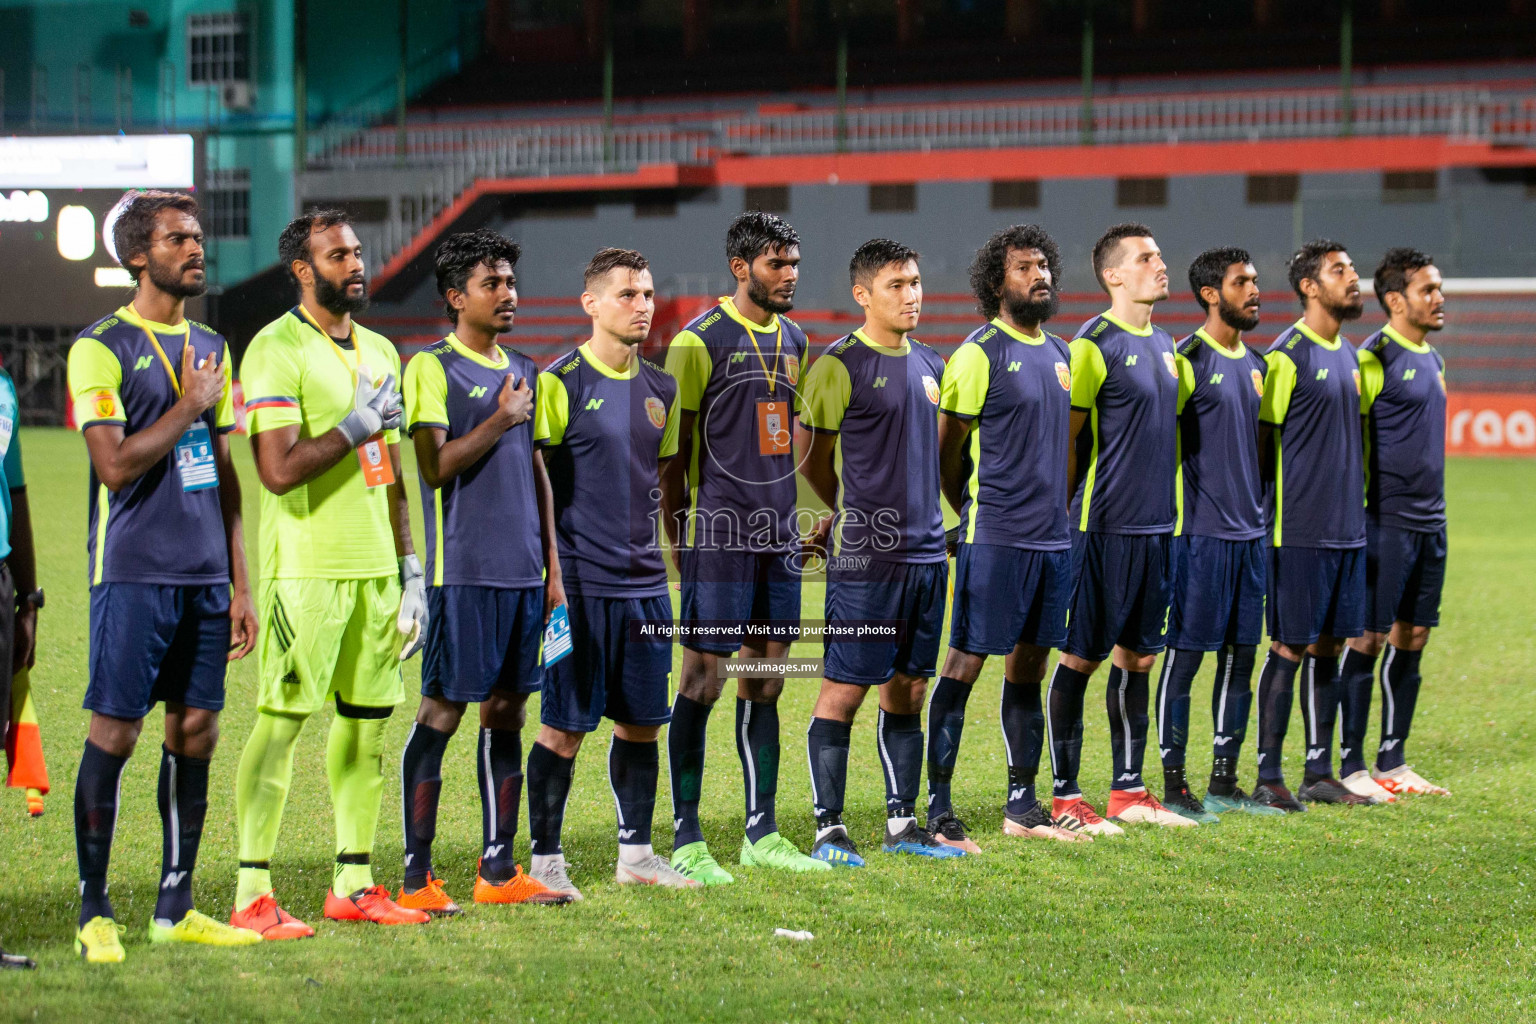 Foakaidhoo FC vs United Victory in Dhiraagu Dhivehi Premier League 2019 held in Male', Maldives on 15th June. Photos: Suadh Abdul Sattar/images.mv 28 6 hours ago